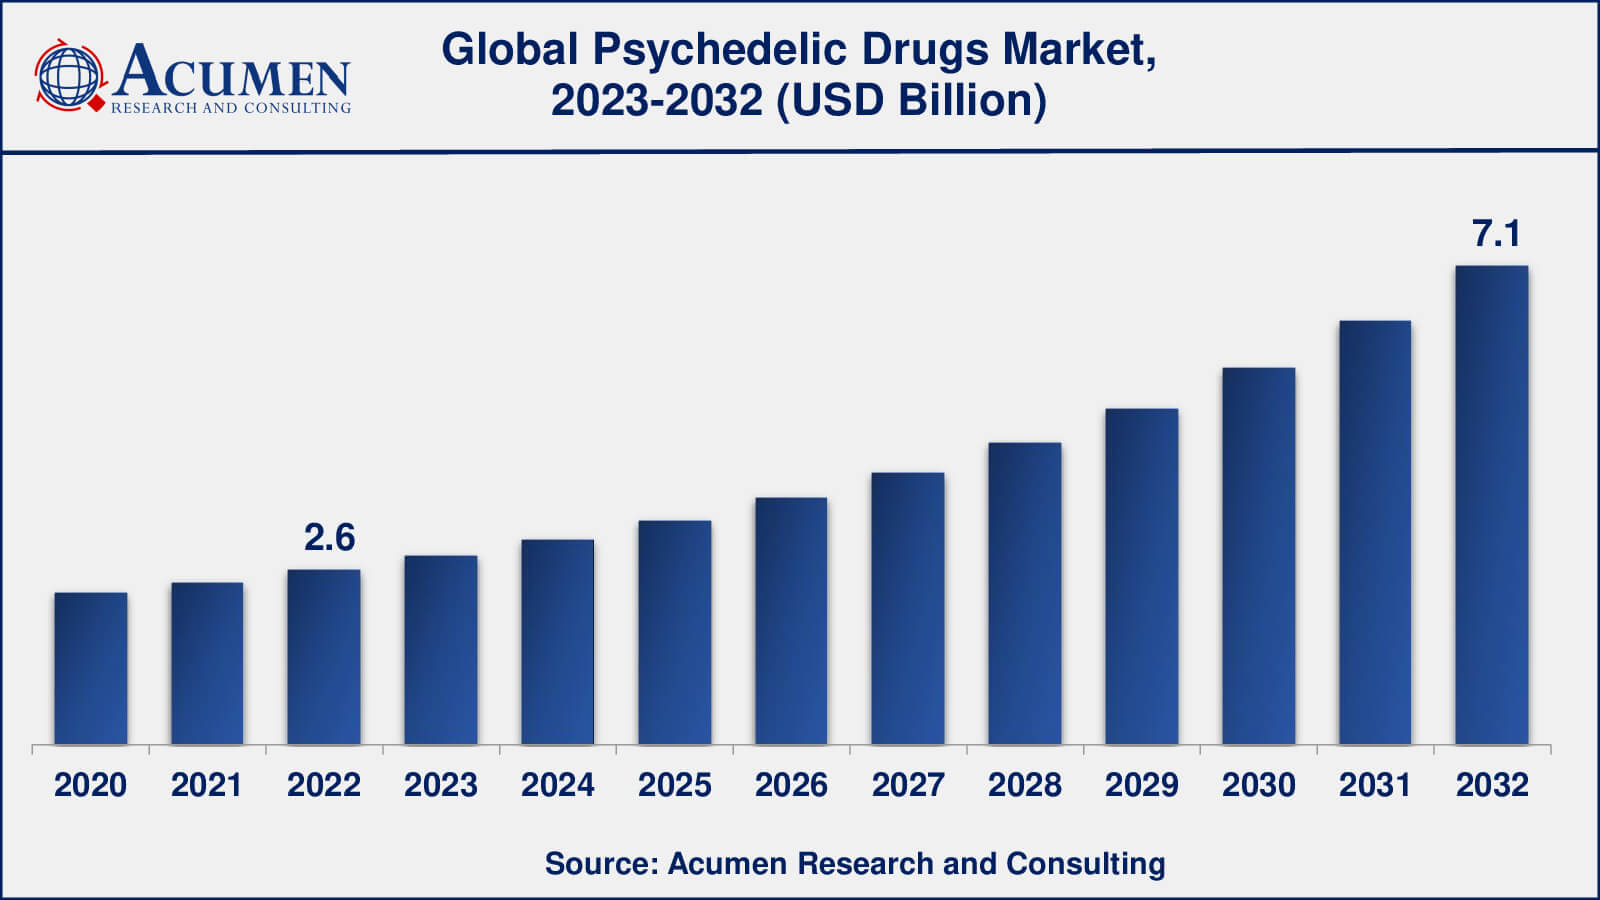 Psychedelic Drugs Market Analysis Period